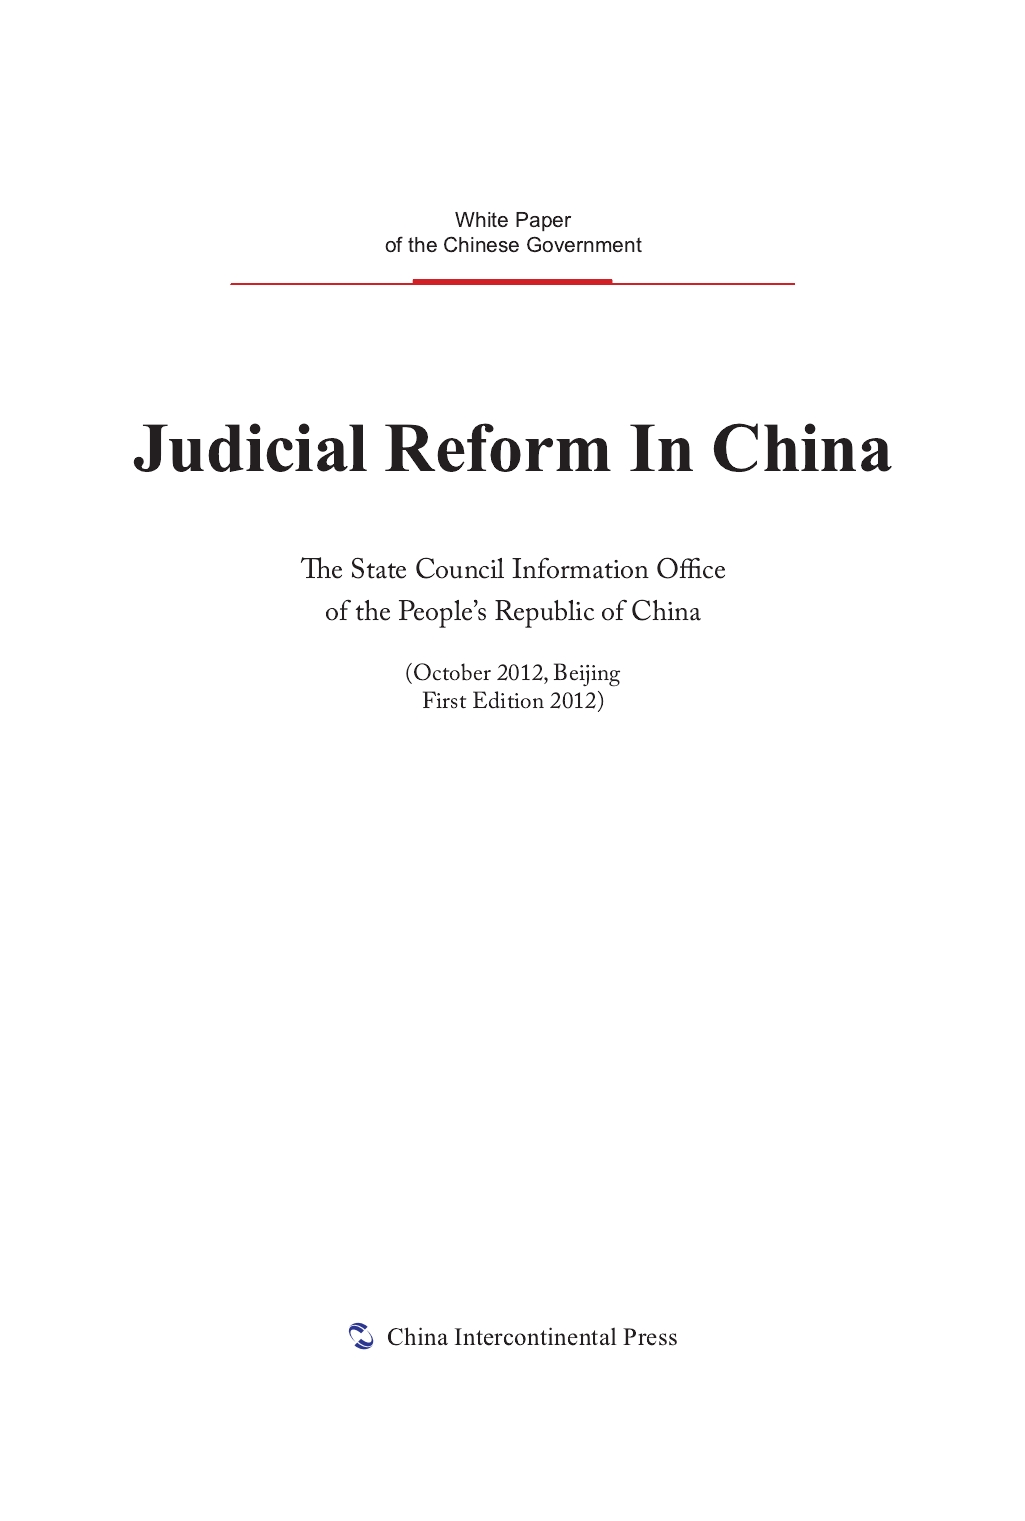 Judicial Reform In China